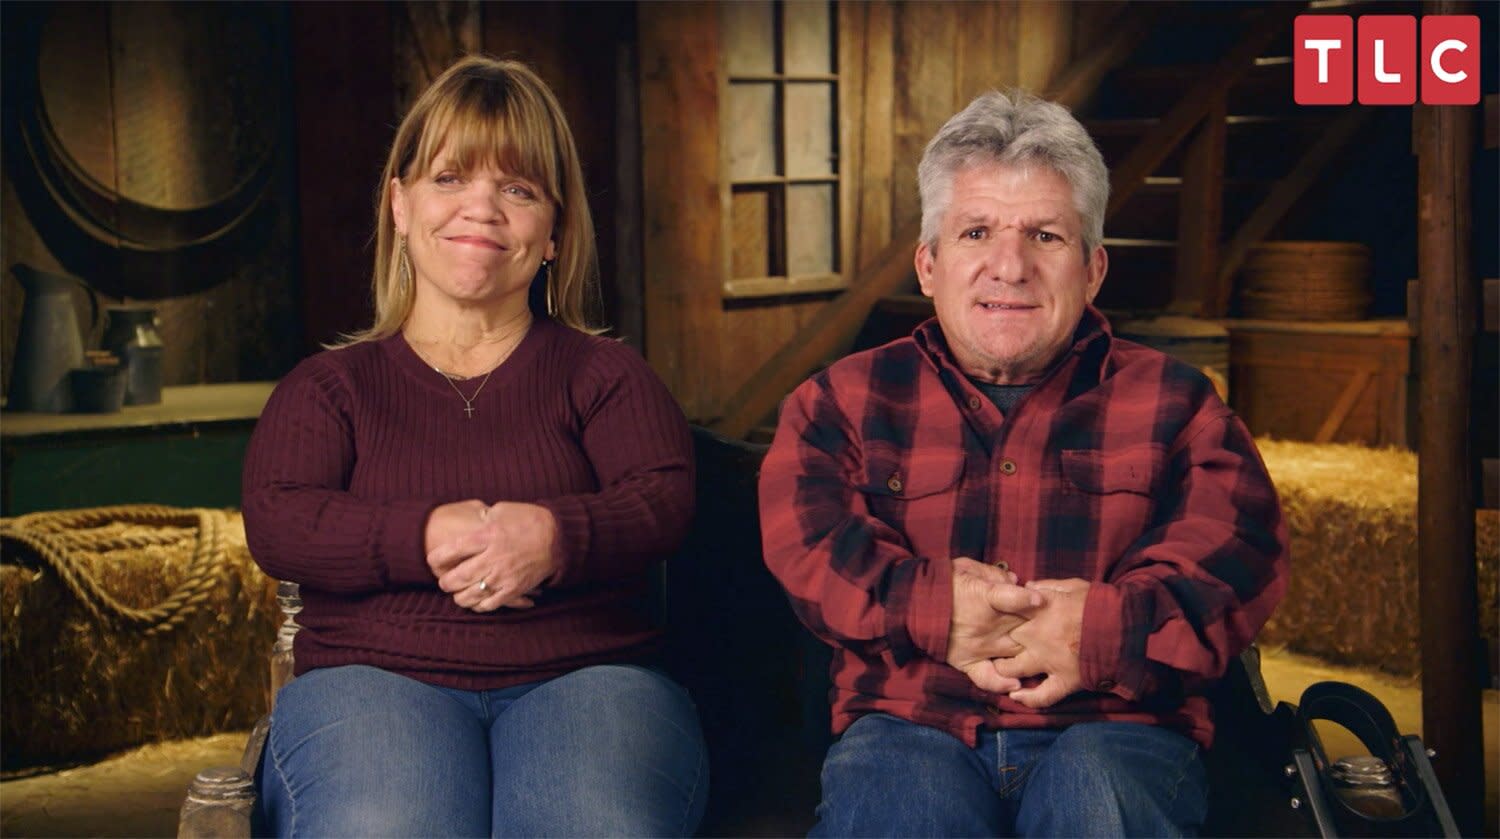 LPBW : Amy Roloff Says 'It's Getting Easier' Meeting with Ex Matt at ...